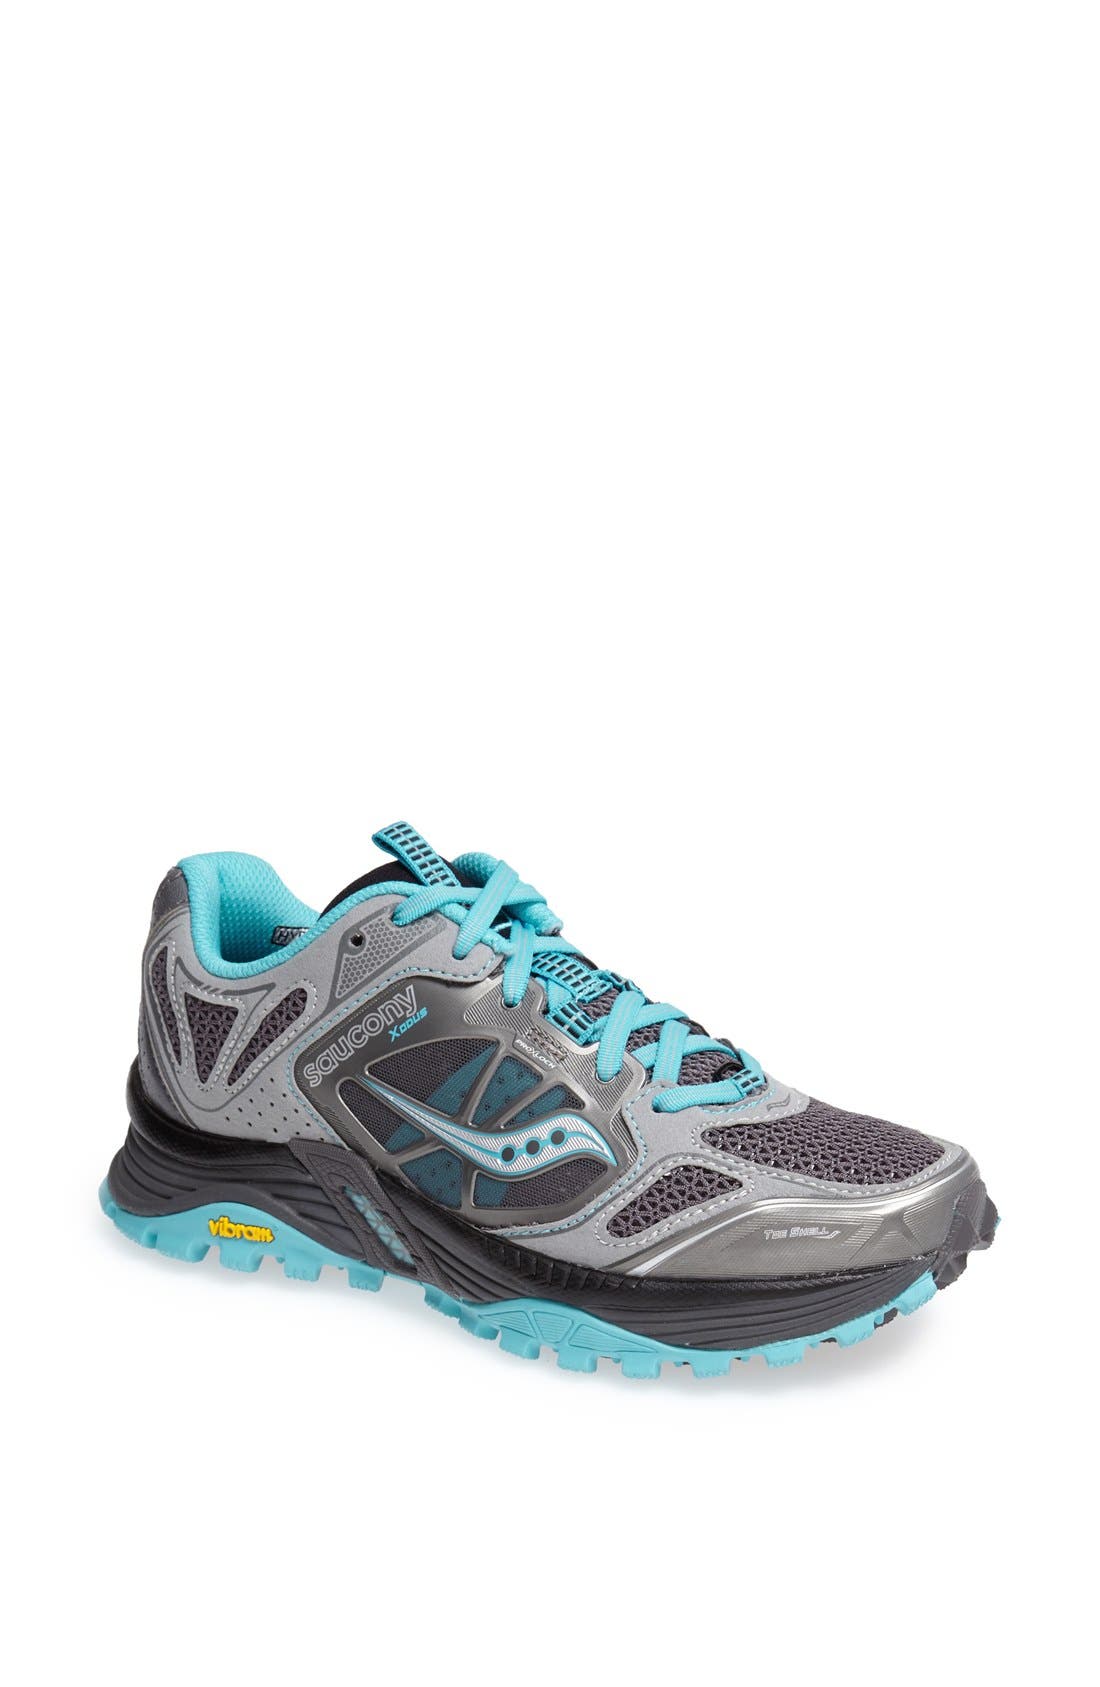 saucony xodus 4.0 trail running shoes